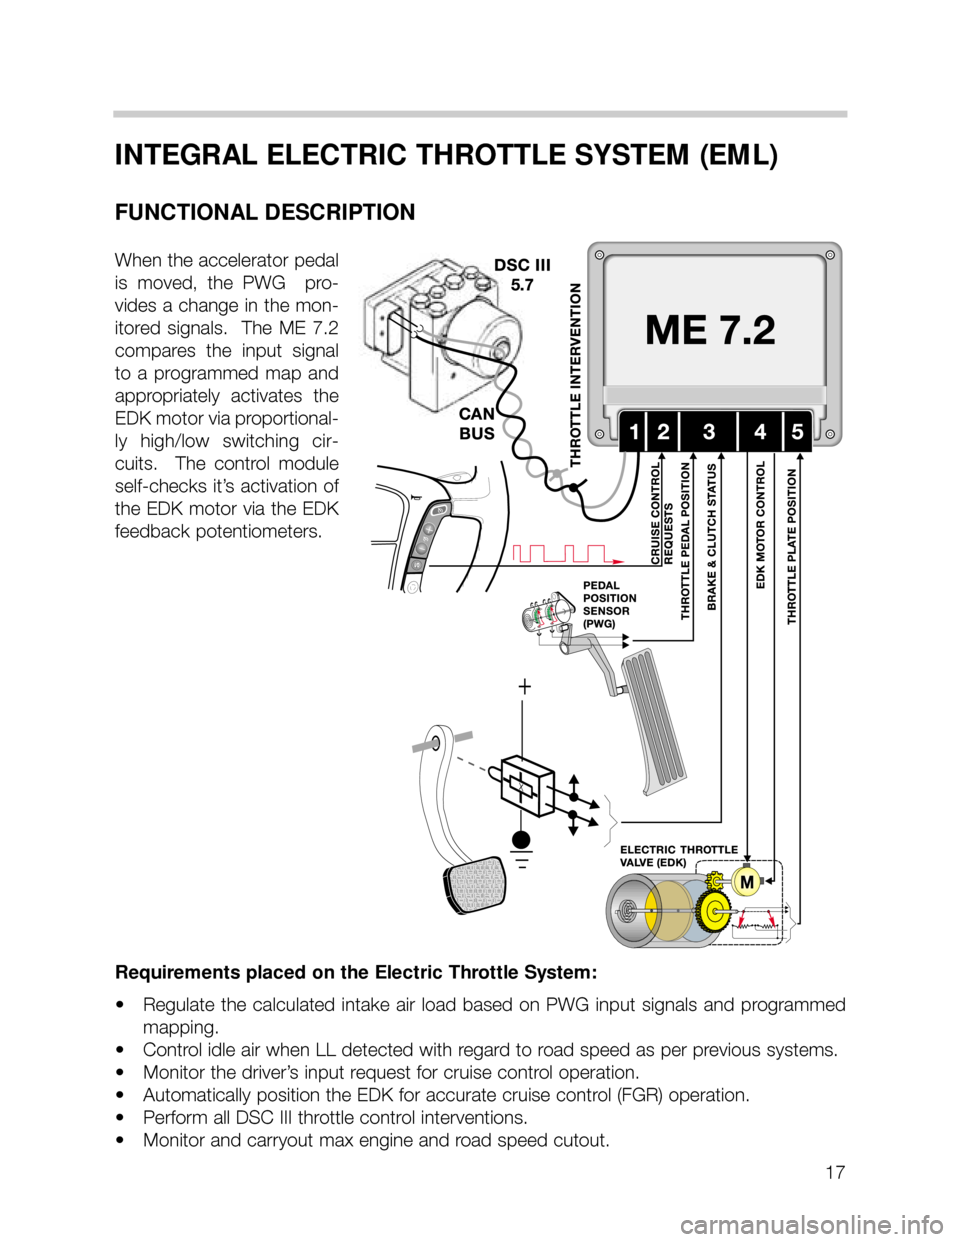 BMW 735i 2001 E38 M62TU Engine Workshop Manual 17
INTEGRAL ELECTRIC THROTTLE SYSTEM (EML)
FUNCTIONAL DESCRIPTION
When the accelerator pedal
is  moved,  the  PWG    pro-
vides a change in the mon-
itored  signals.    The  ME  7.2
compares  the  inp